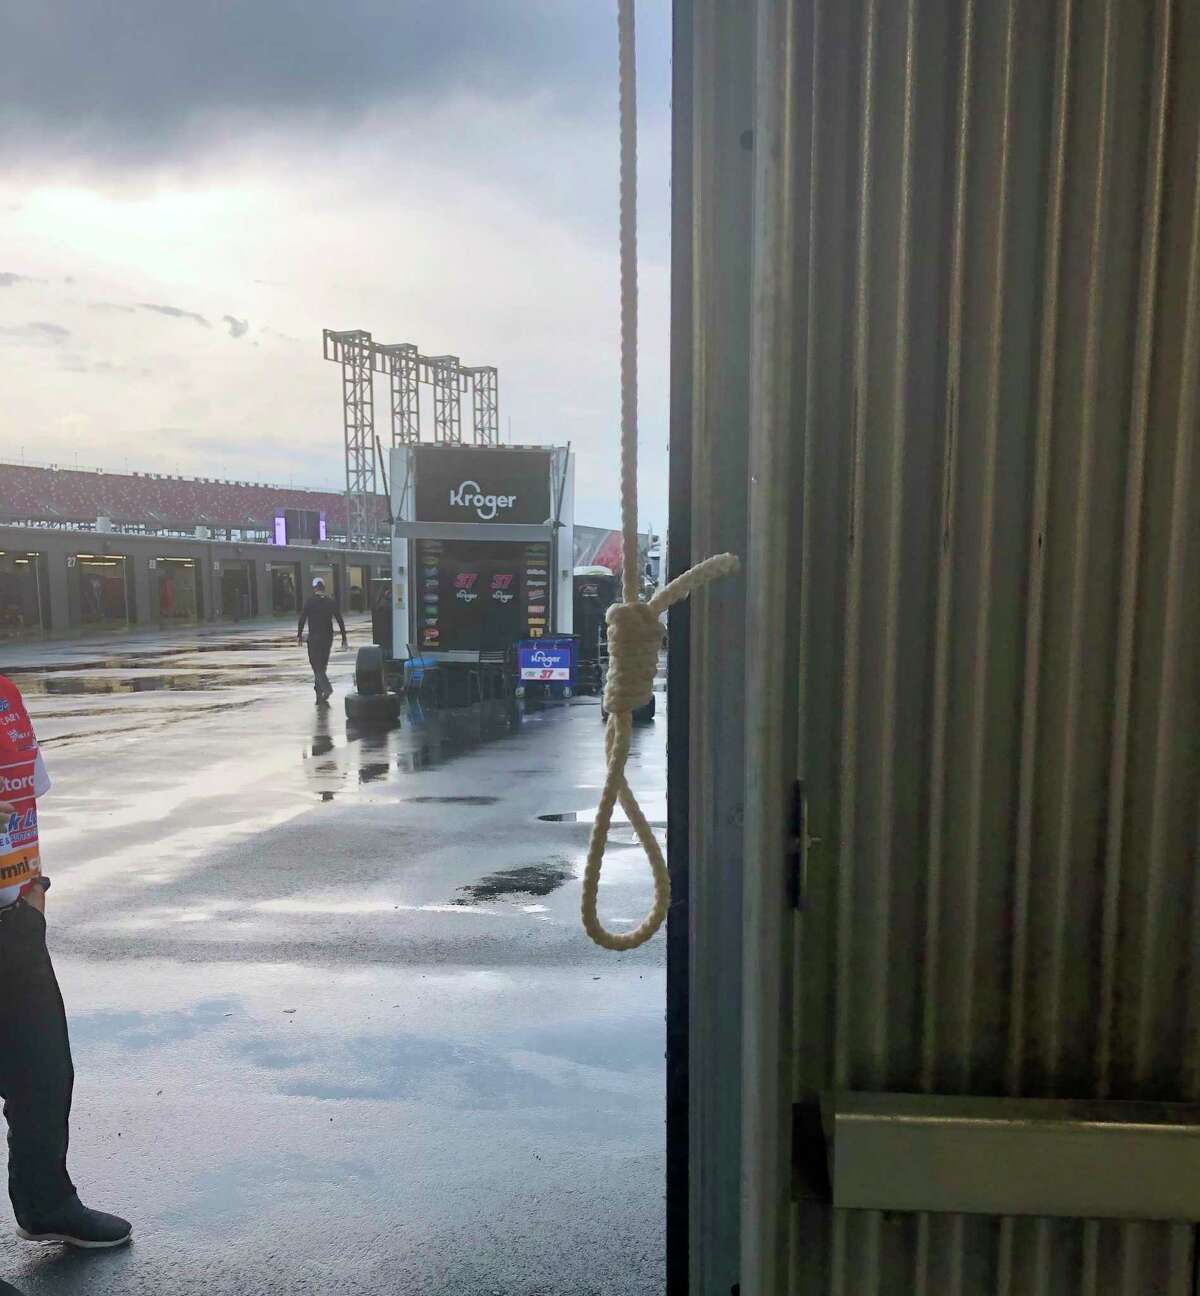 This photo provided by NASCAR shows the noose found in the garage stall of Black driver Bubba Wallace at Talladega Superspeedway in Talladega, Ala., on Sunday, June 21, 2020. The discovery prompted a federal investigation that determined the rope had been there since at least last October. (NASCAR via AP)